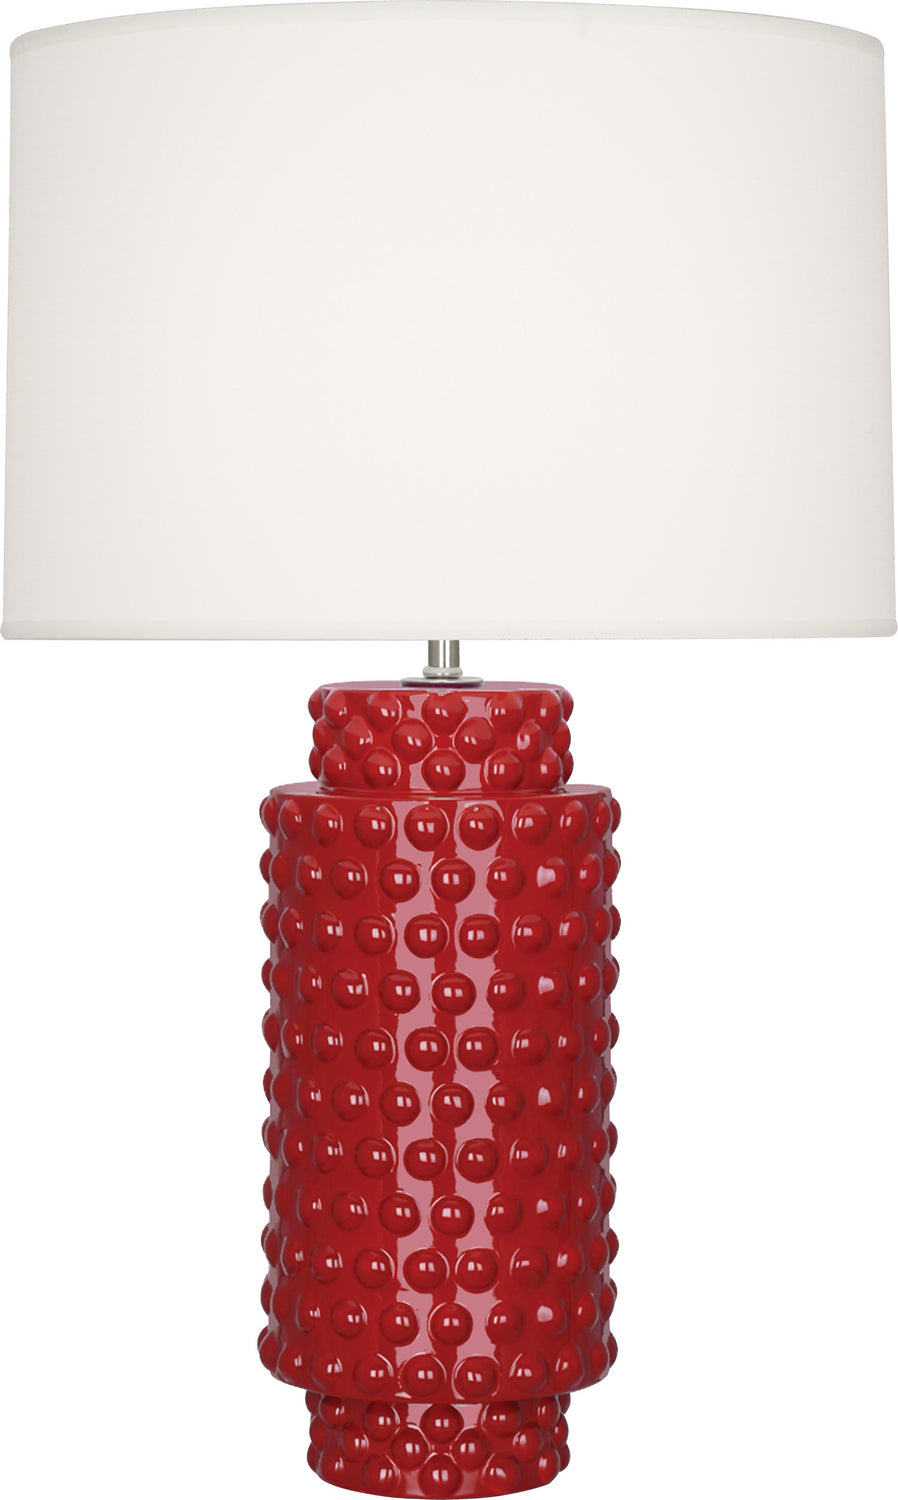 Robert Abbey - One Light Table Lamp - Dolly - Ruby Red Glazed Textured Ceramic- Union Lighting Luminaires Decor